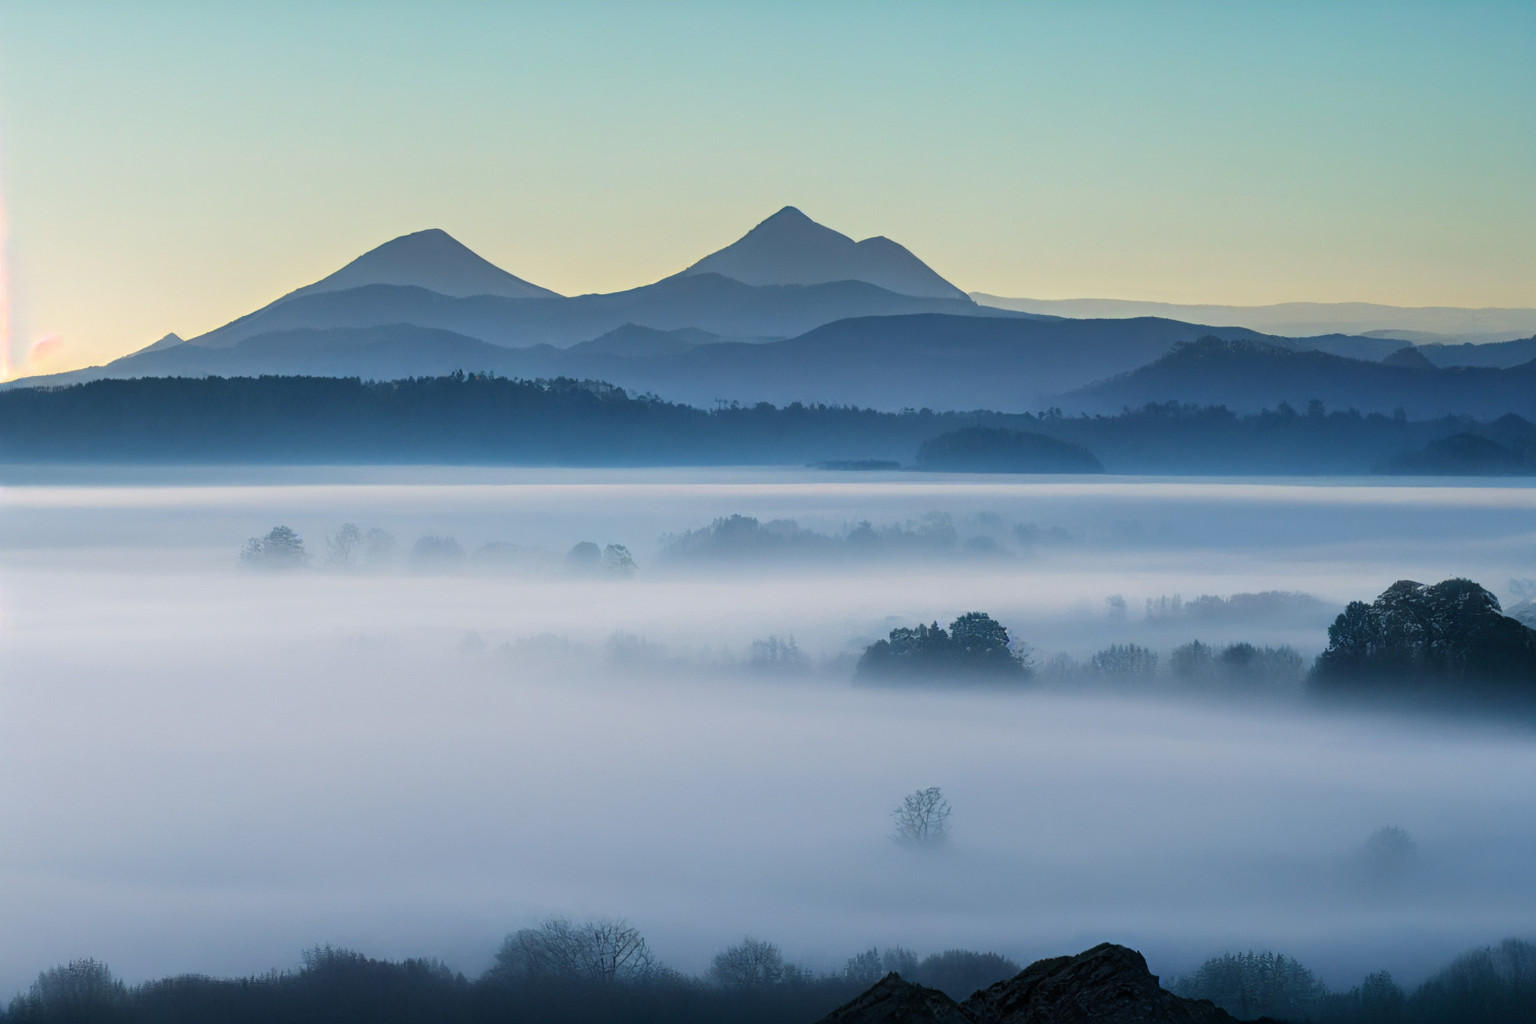 A landscape photograph of english mountains with mist as imagined by Midjourney